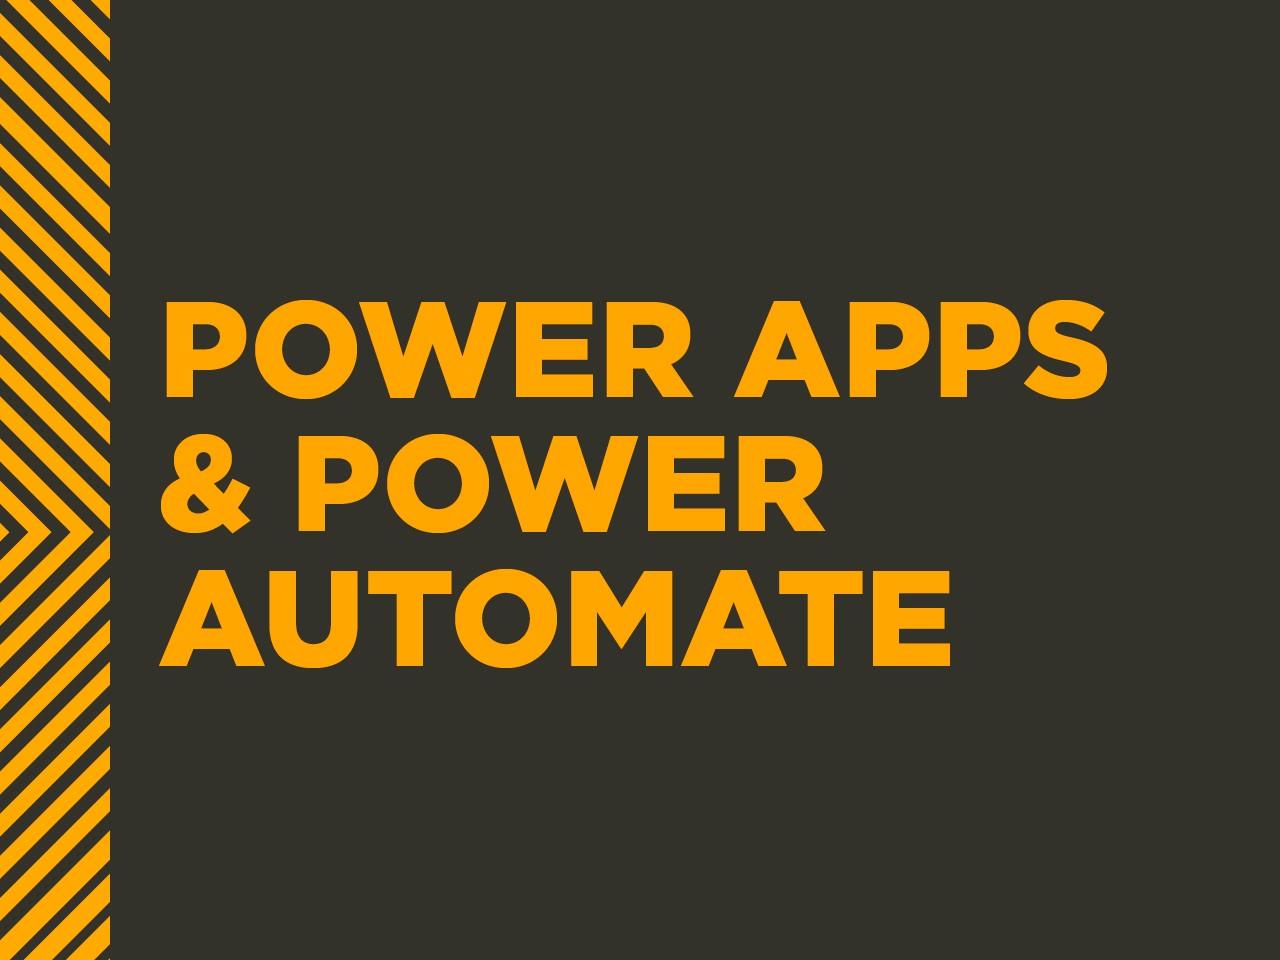 Power Apps & Power Automate